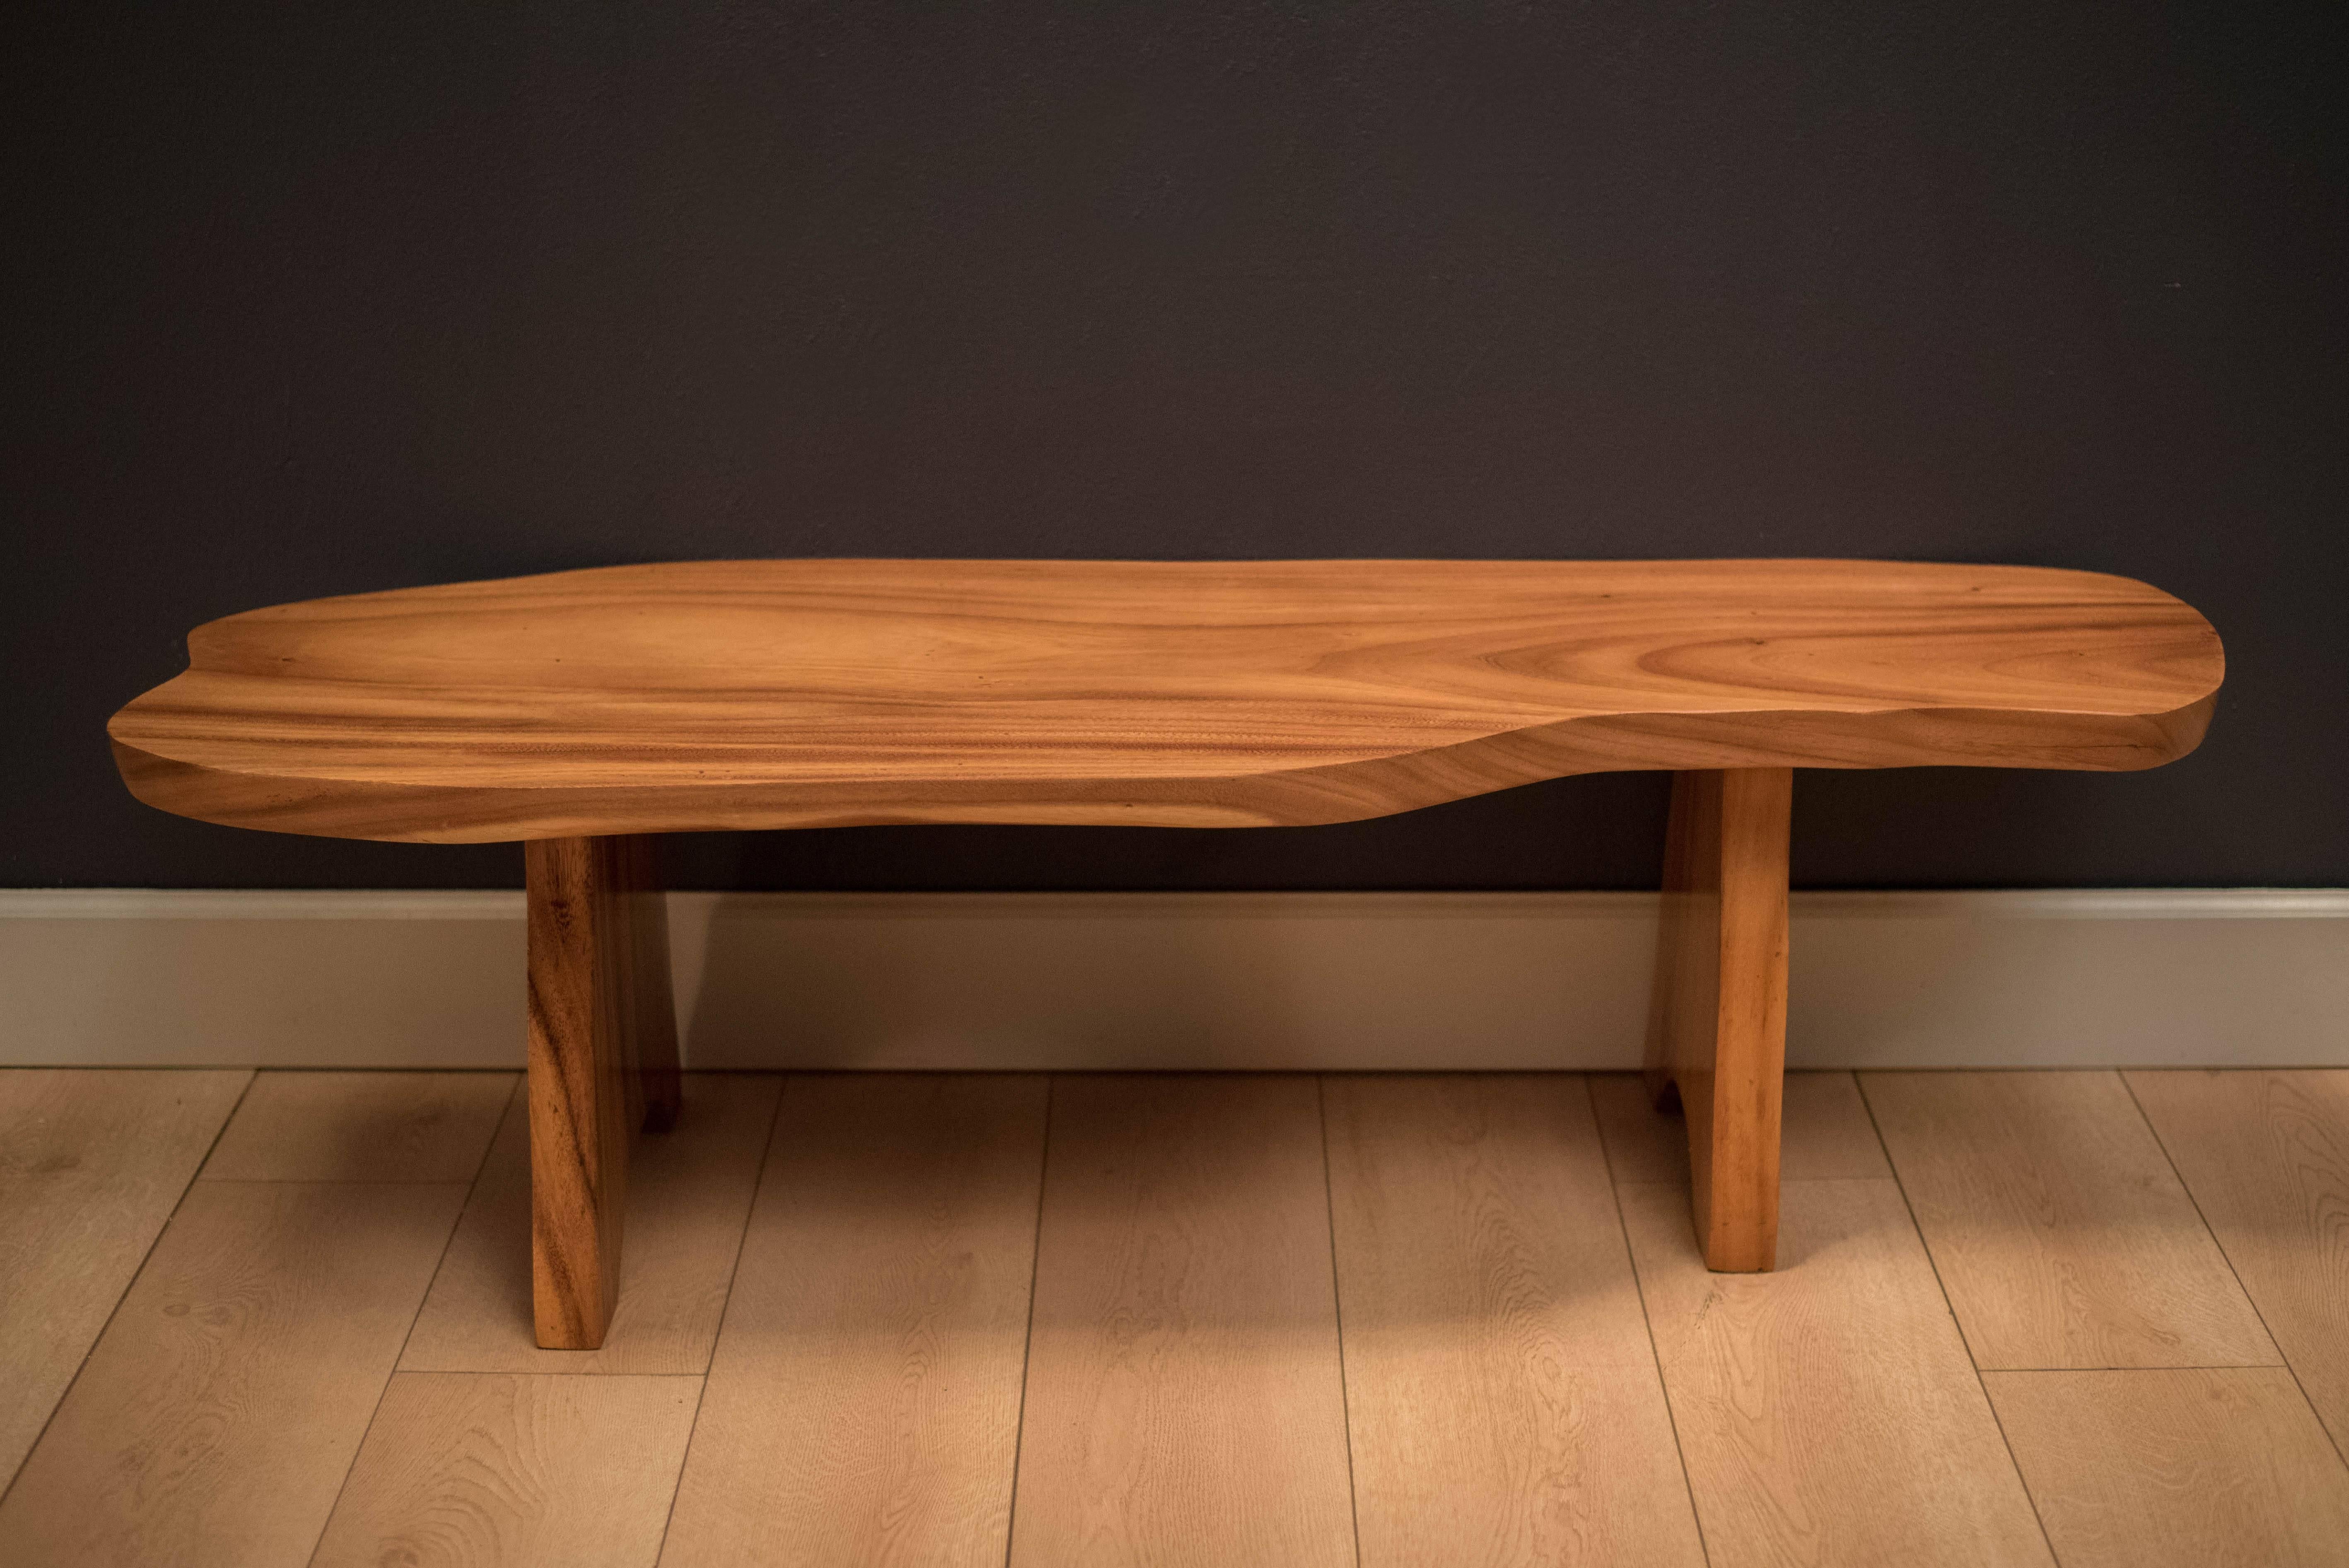 Mid Century free-form solid monkey pod table from the 1960s. This versatile piece is sturdy enough to use as a custom bench or coffee table.